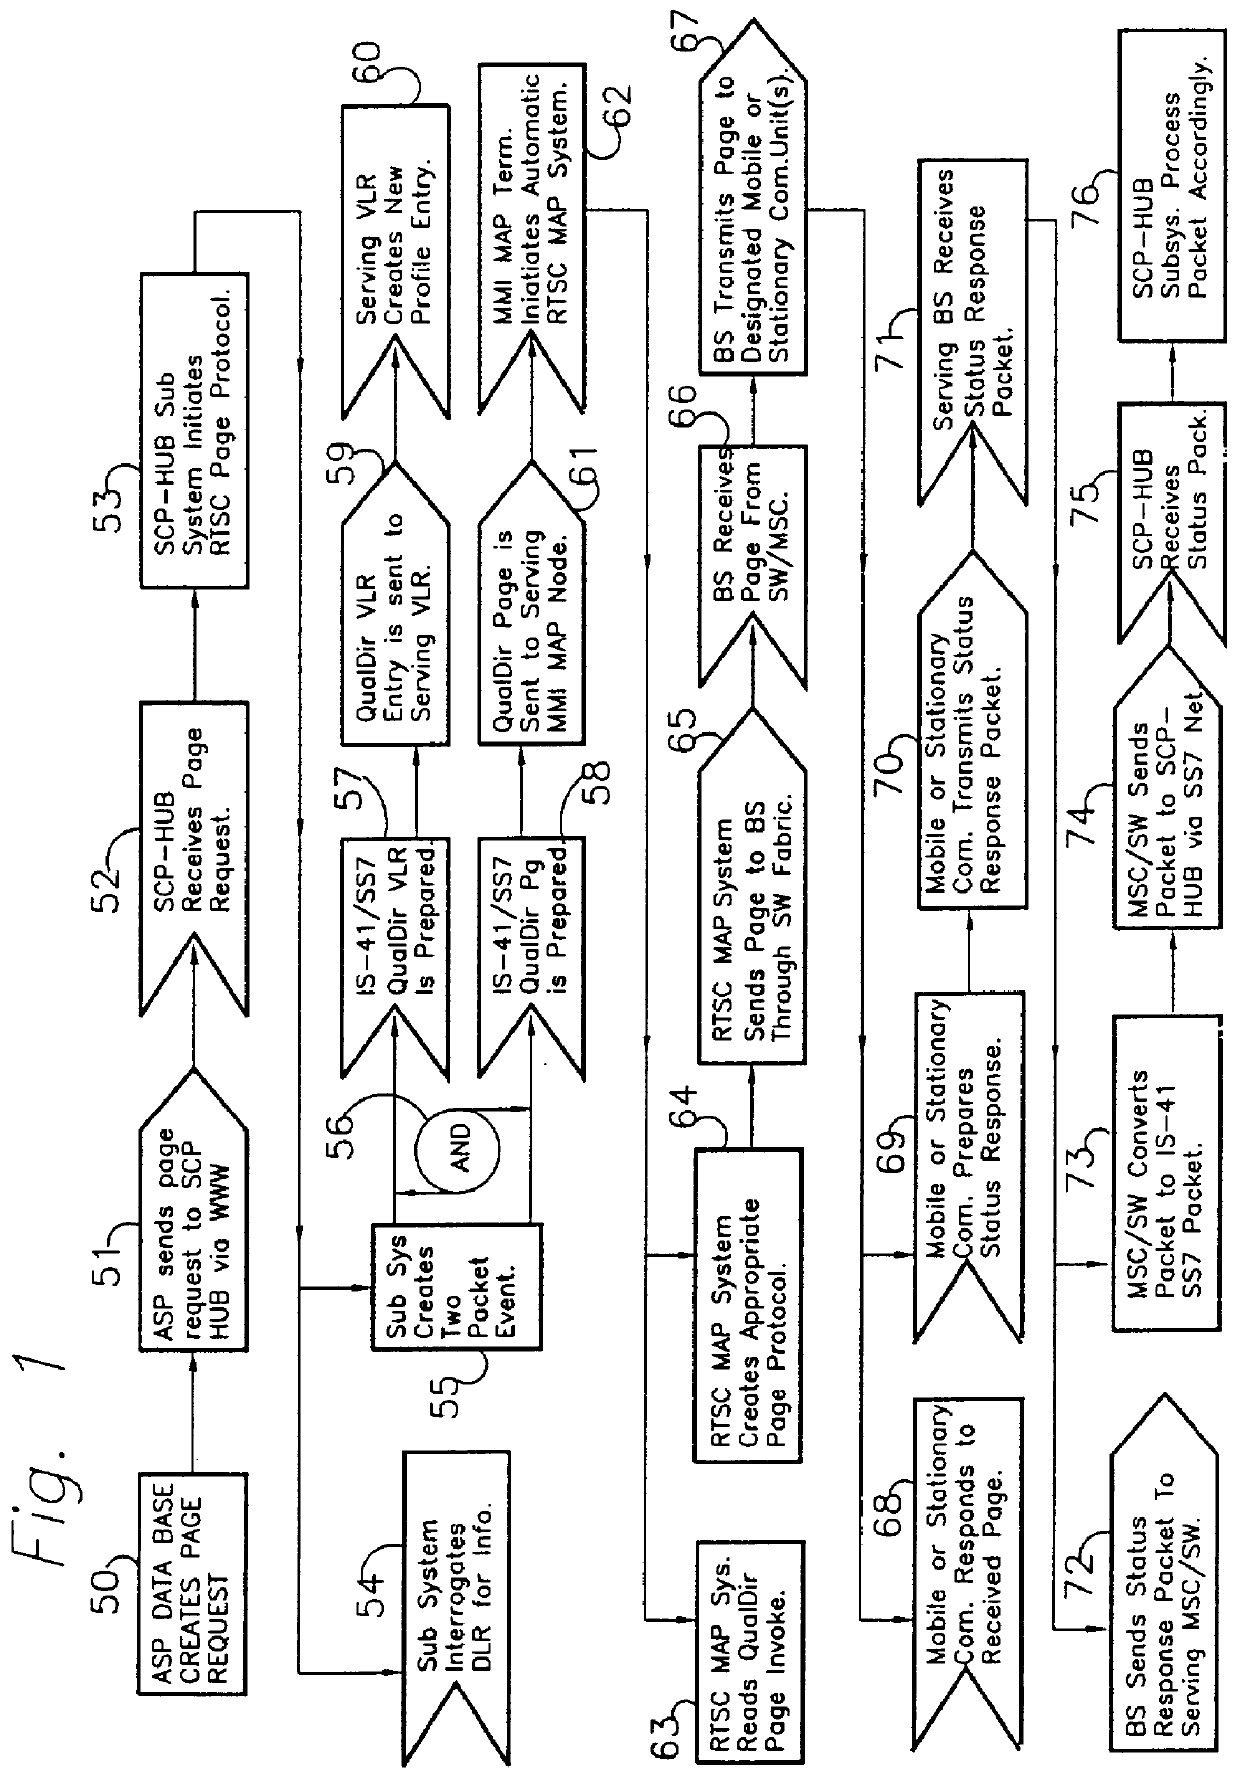 Method and apparatus for remote telephony switch control